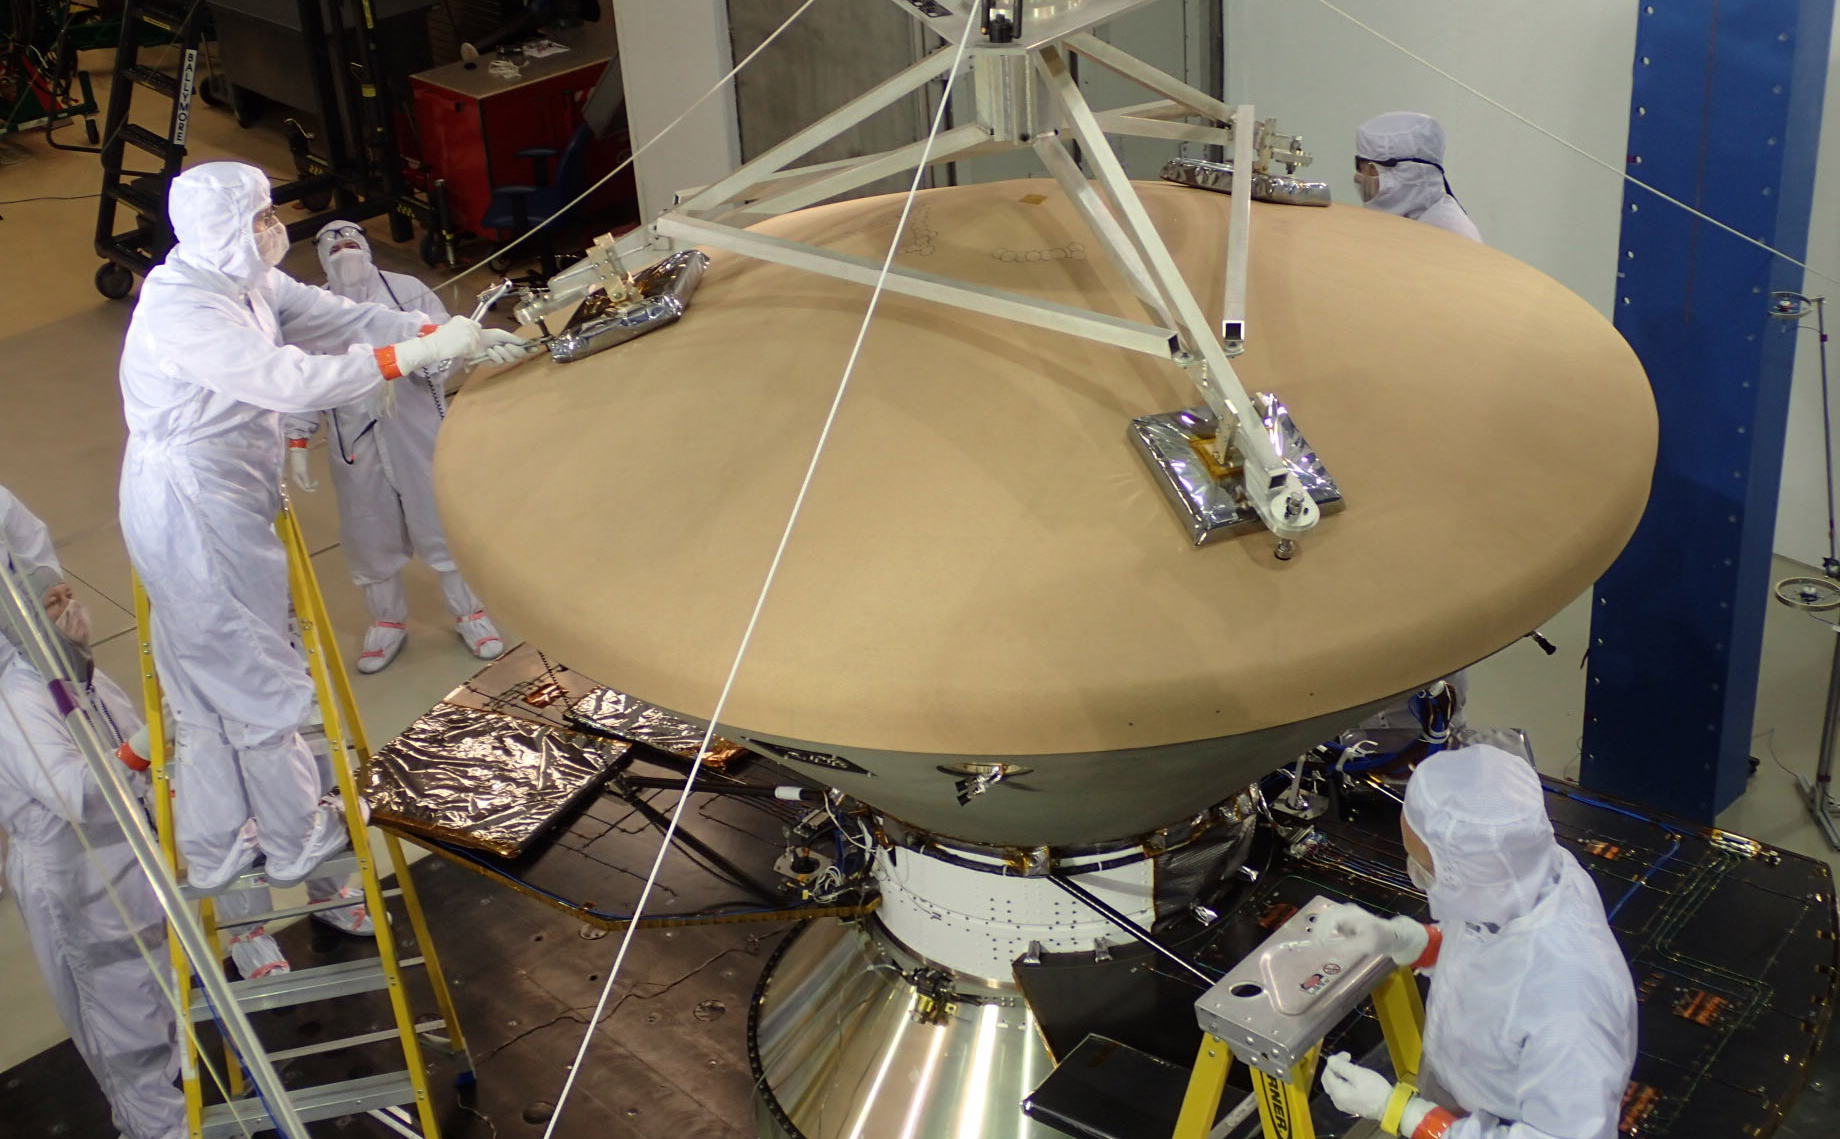 Spacecraft specialists at Lockheed Martin Space Systems, Denver, prepare NASA's InSight spacecraft for vibration testing as part of assuring that it is ready for the rigors of launch from Earth and flight to Mars.